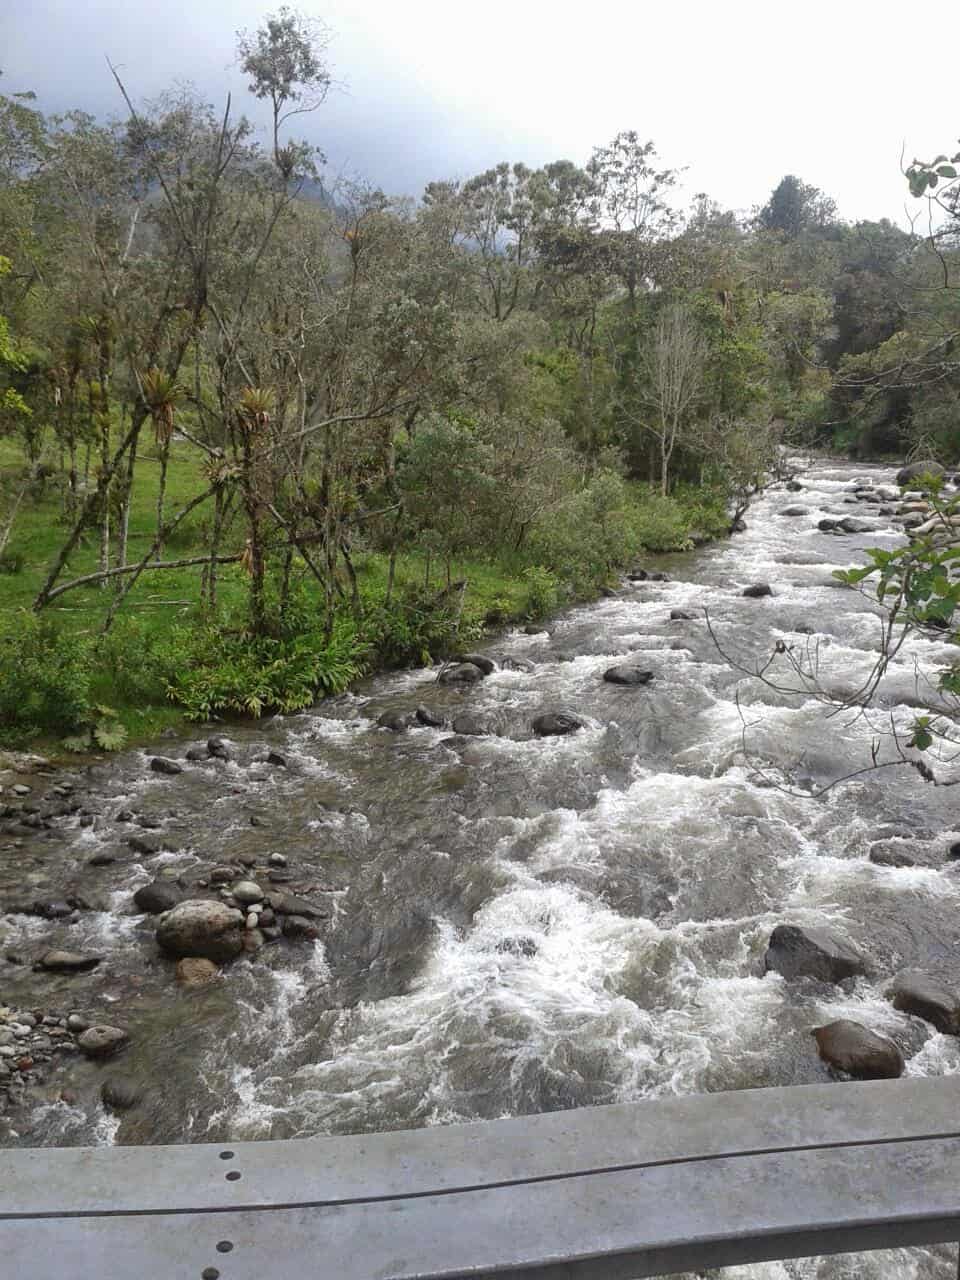 Quindío River on the way to Cocora Valley, Quindío, Colombia